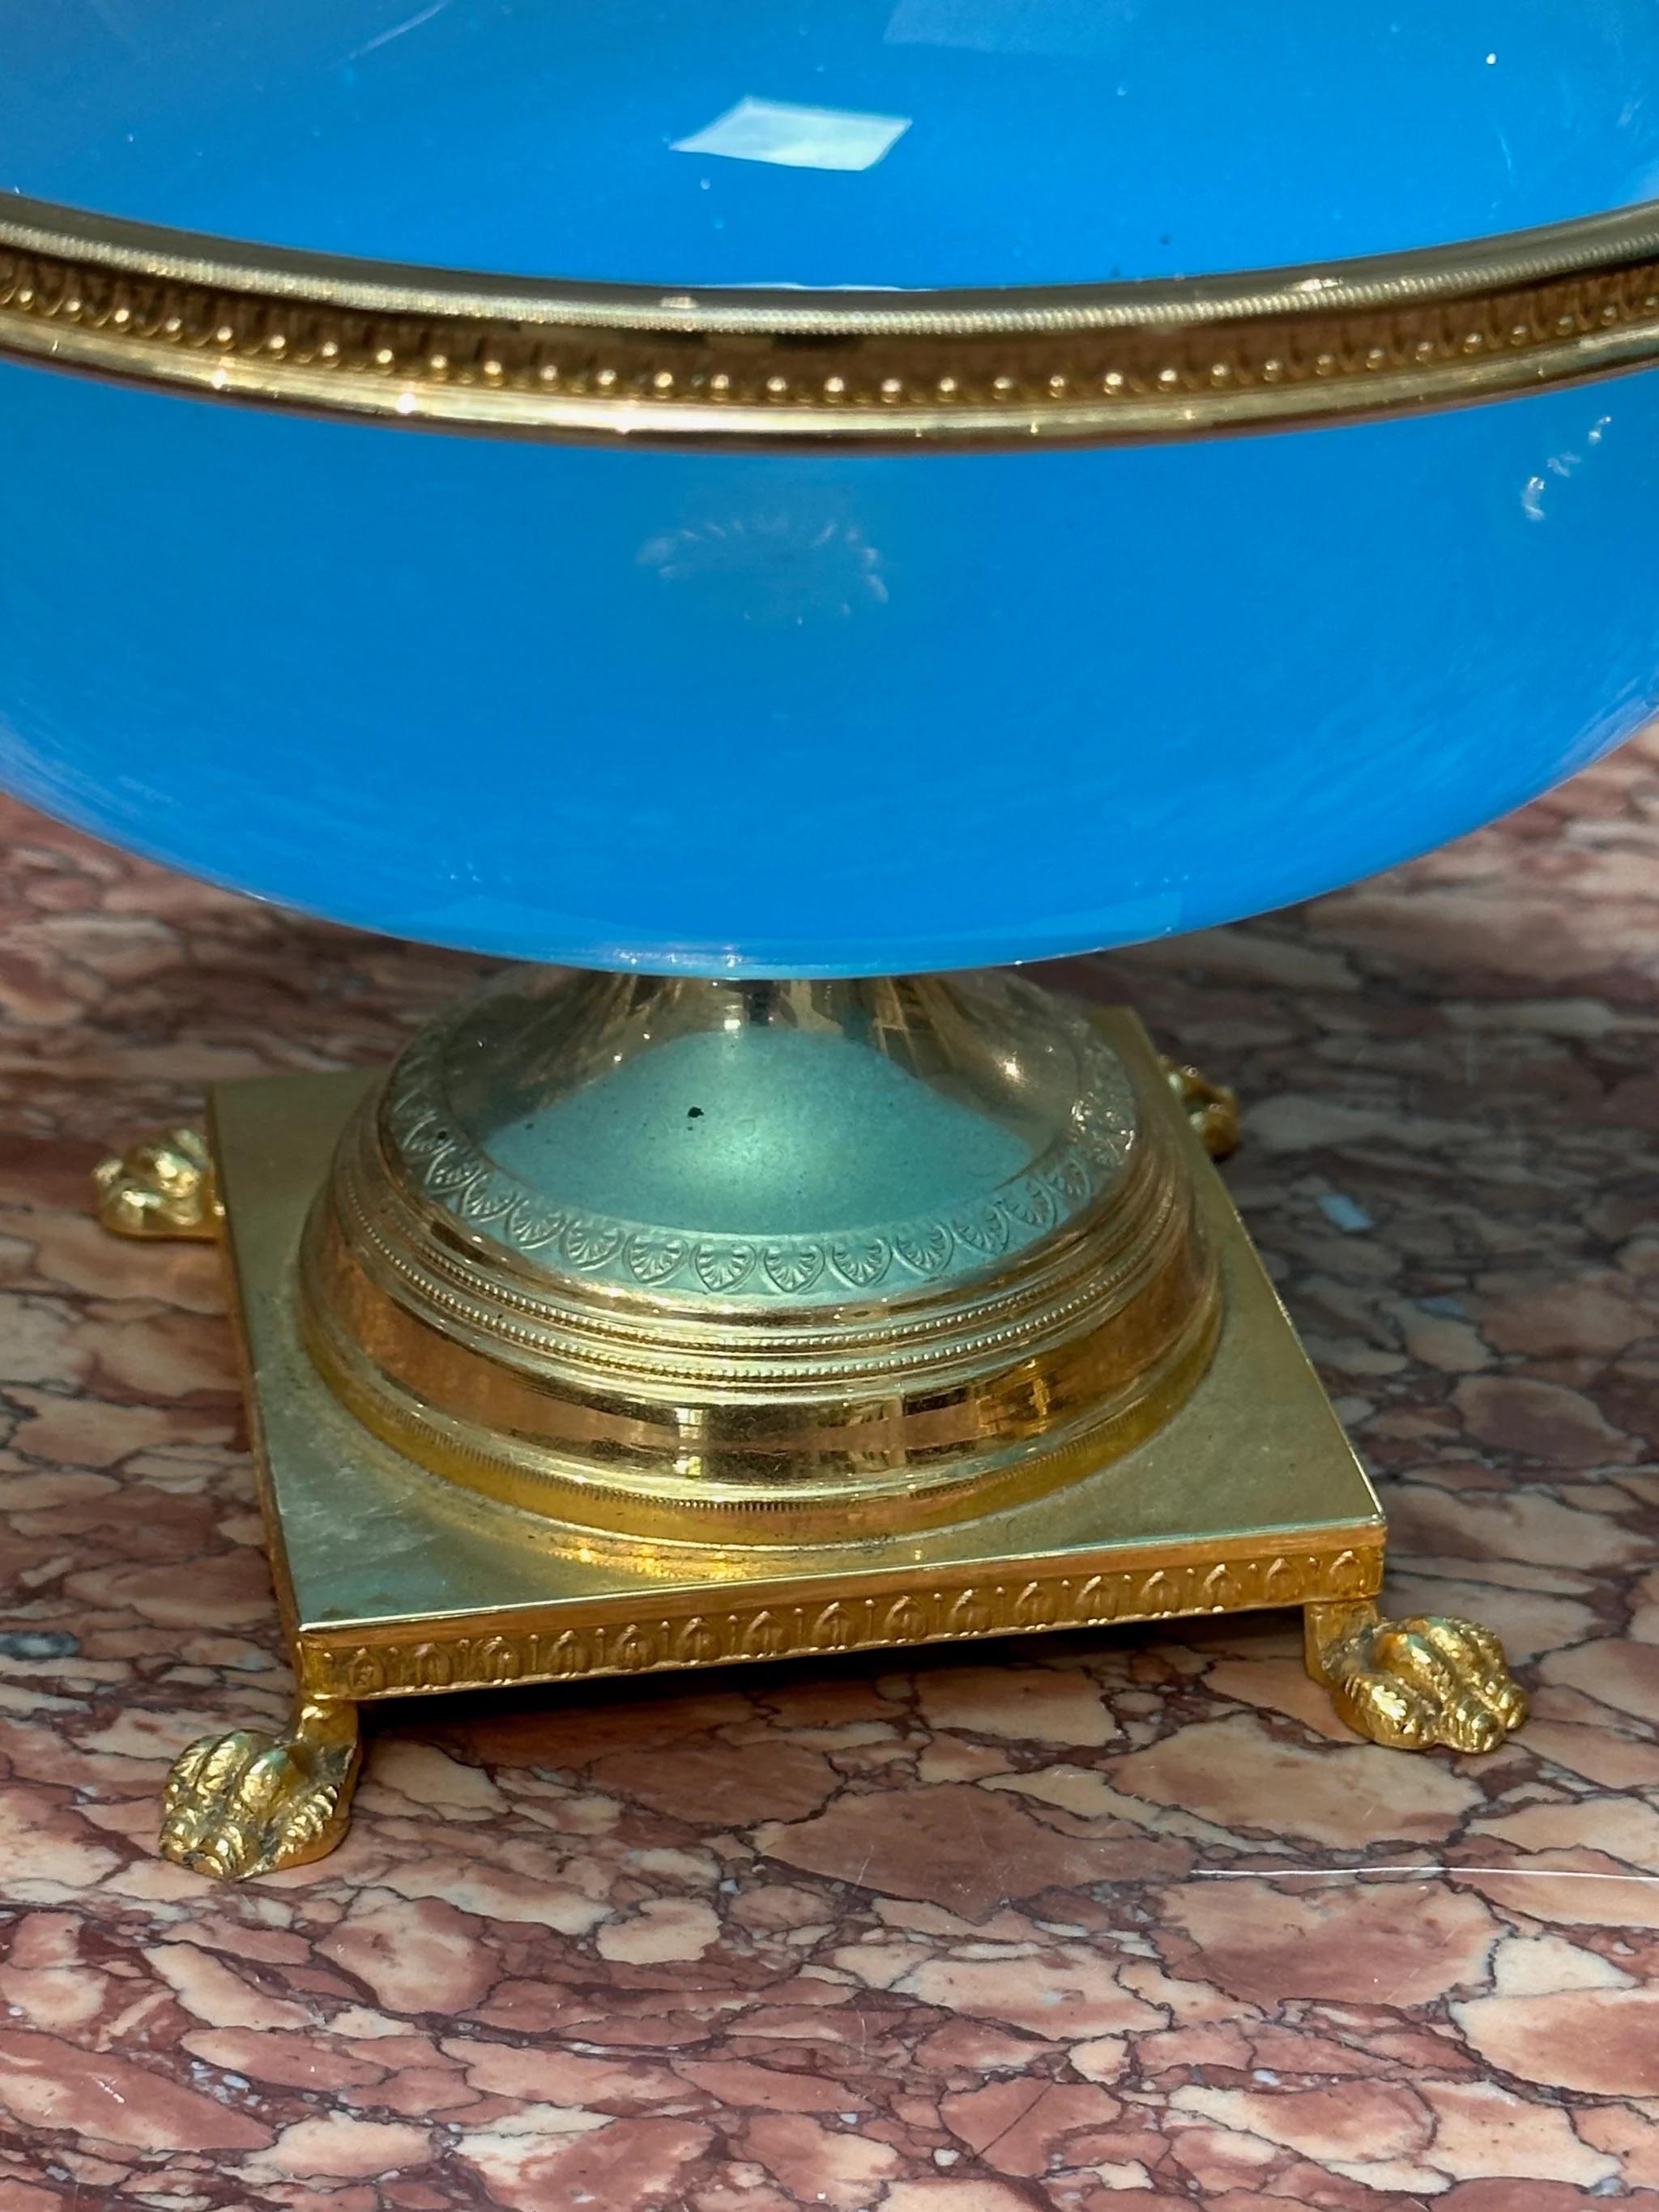 Two-Piece set of French Blue Opaline, c. 1860, Likely Palais Royale 1